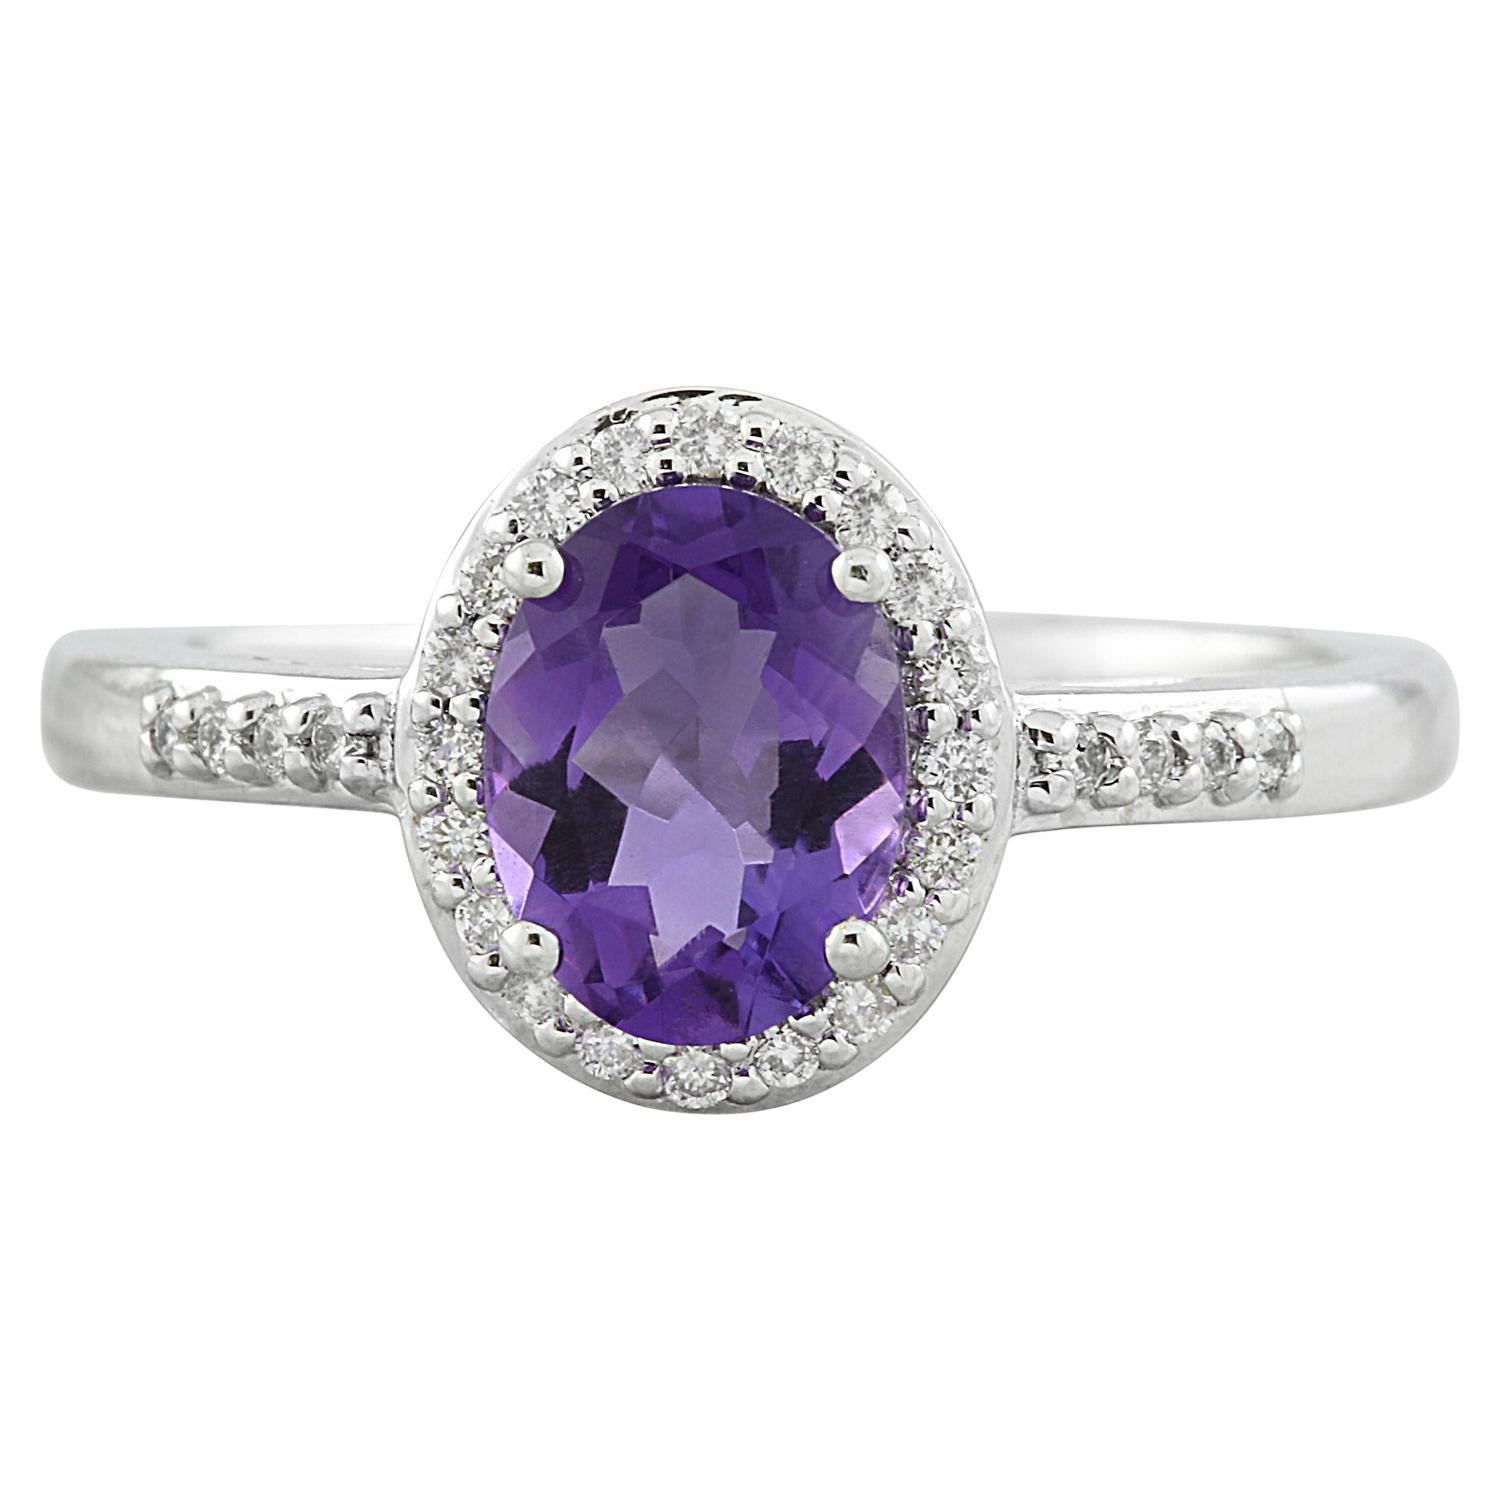 Exquisite Natural Amethyst Diamond Ring in 14K Solid White Gold